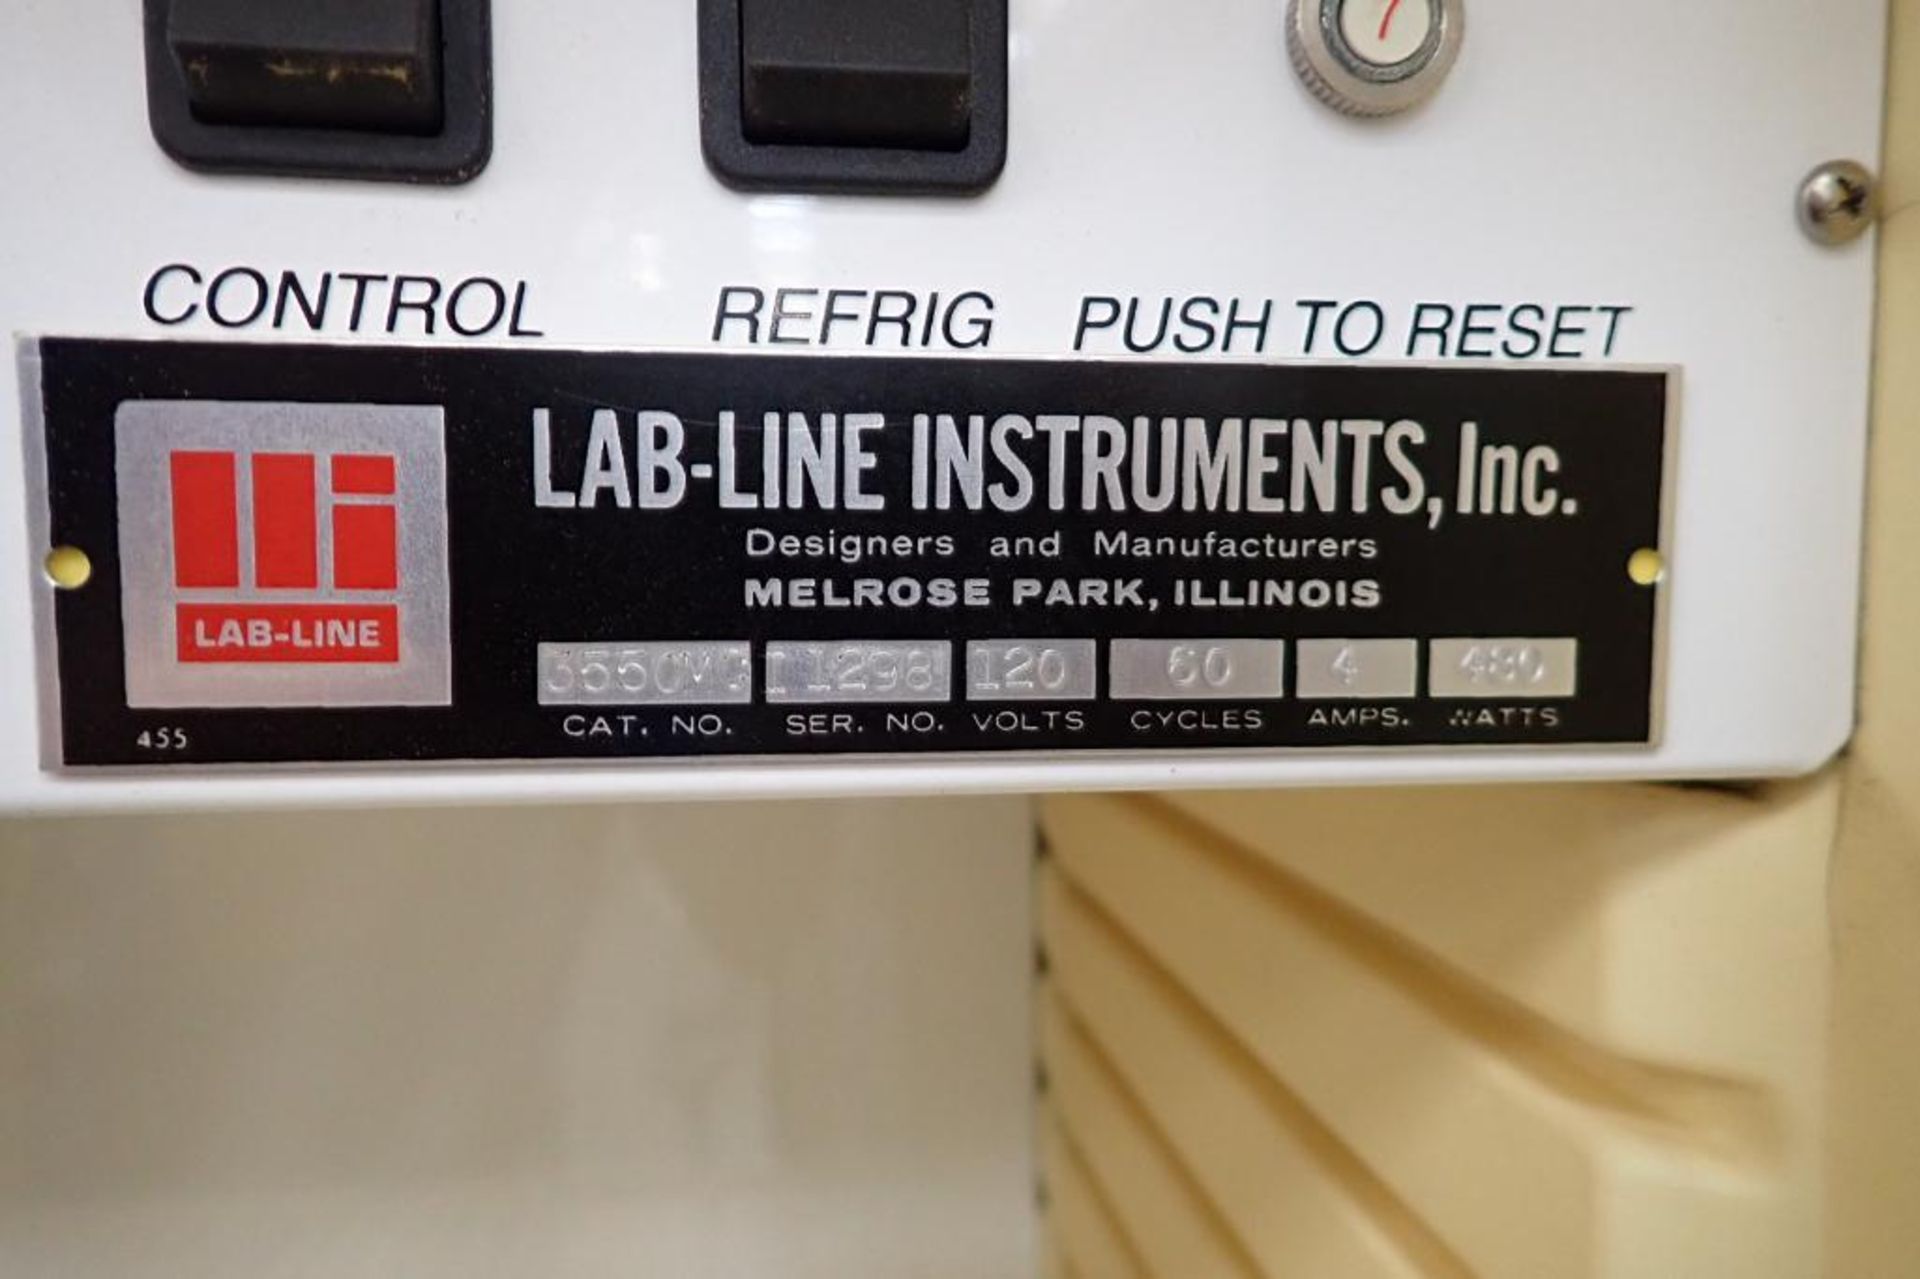 Mocon-lab line bench top environmental chamber - Image 5 of 5